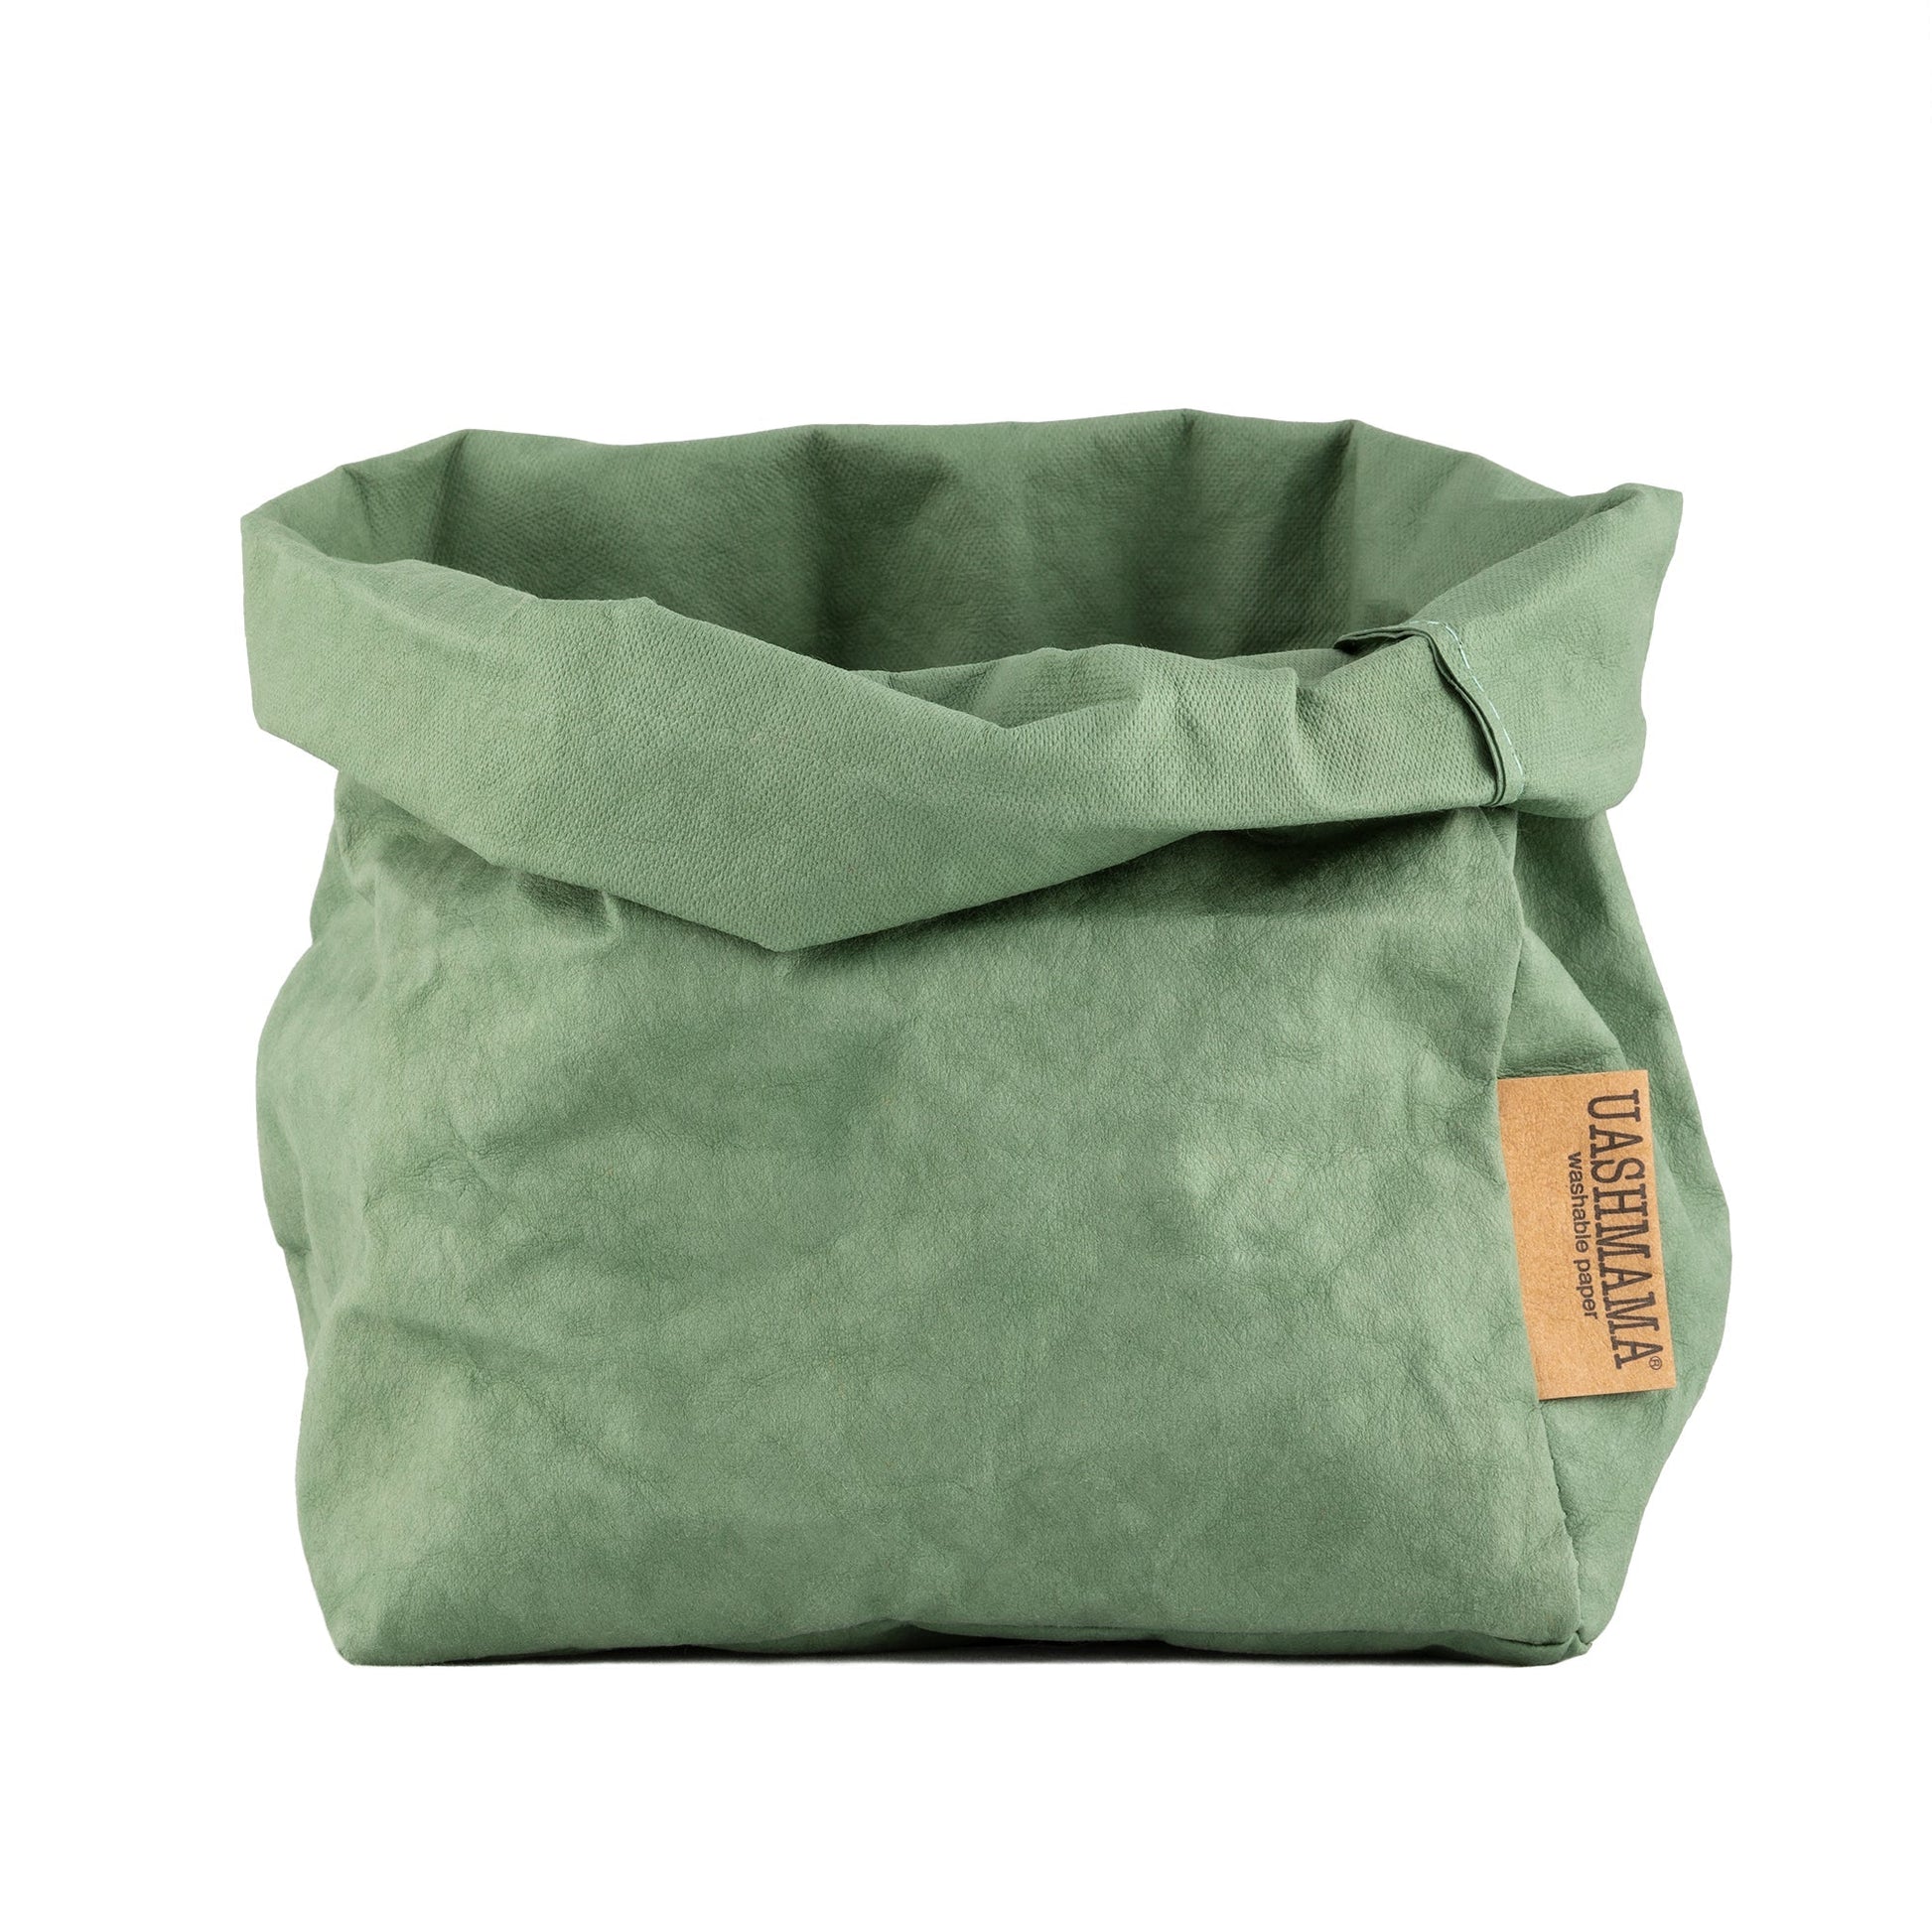 A washable paper bag is shown. The bag is rolled down at the top and features a UASHMAMA logo label on the bottom left corner. The bag pictured is the medium size in green.